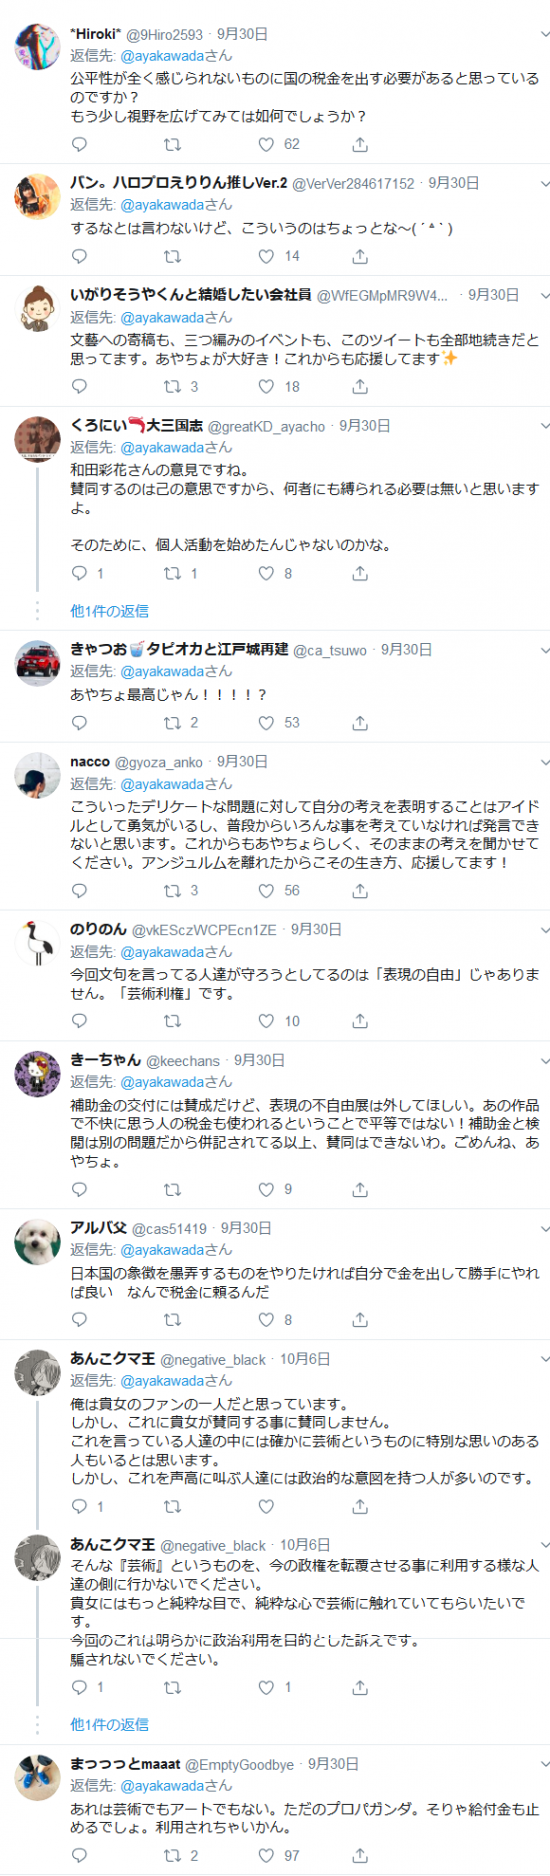 Screenshot_2019-10-08 和田彩花さんはTwitterを使っています 「https t co F0asyH3GNh」 Twitter.png